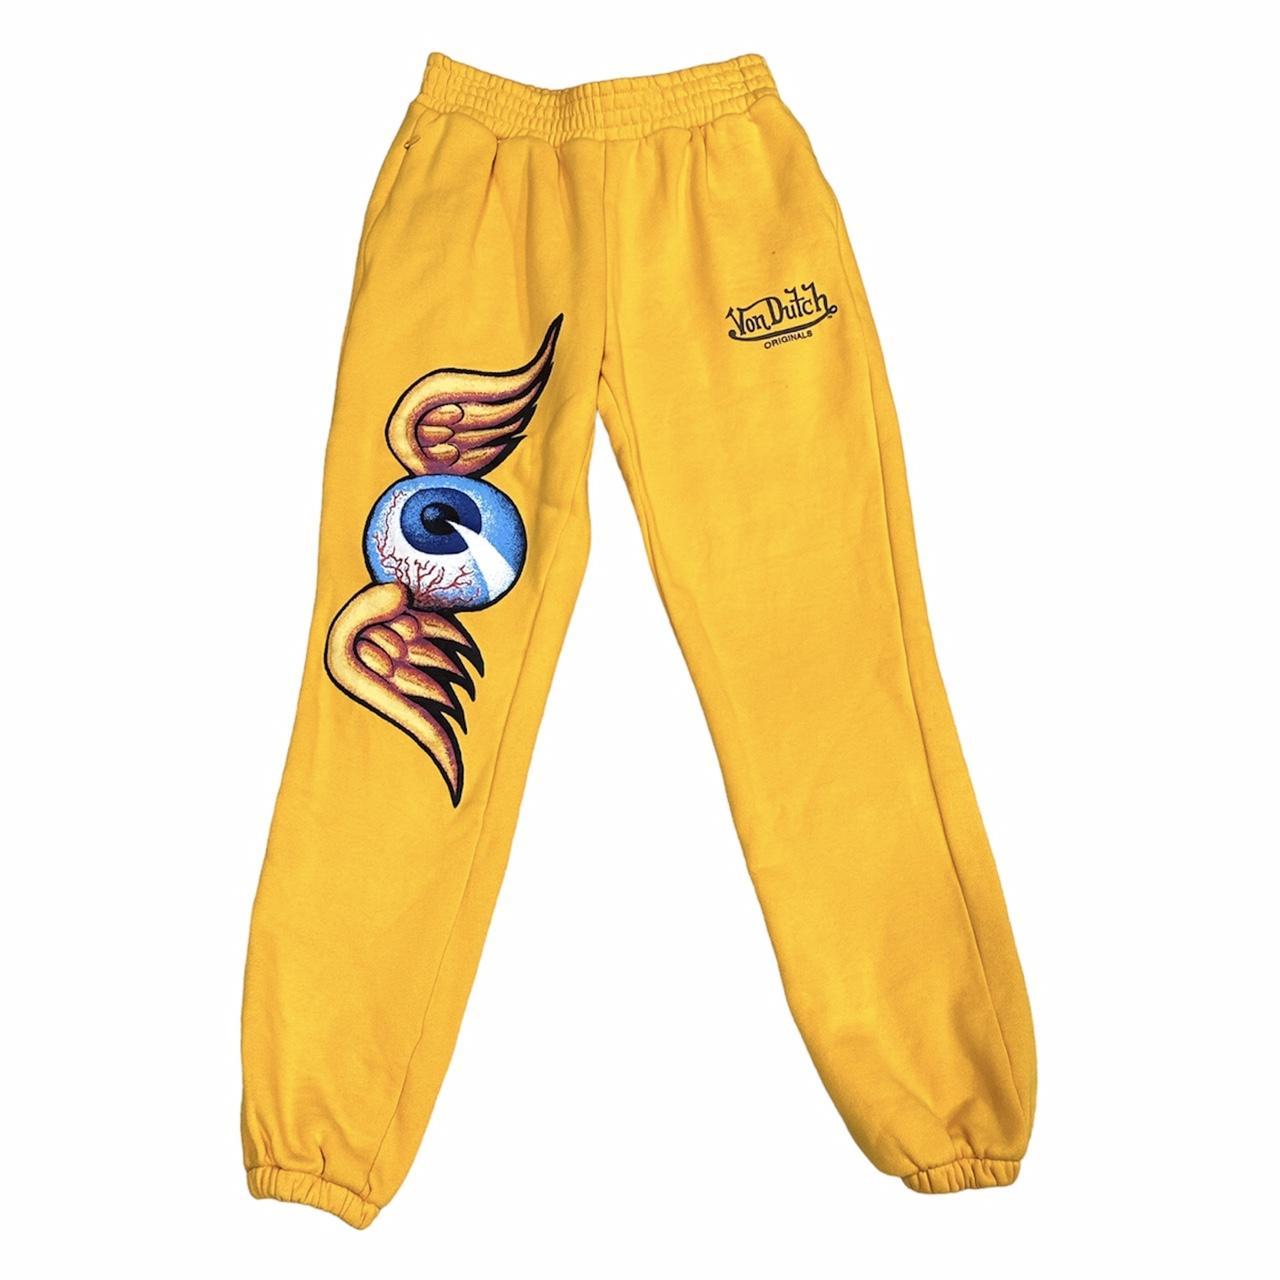 Von Dutch Men's Yellow and Gold Joggers-tracksuits | Depop